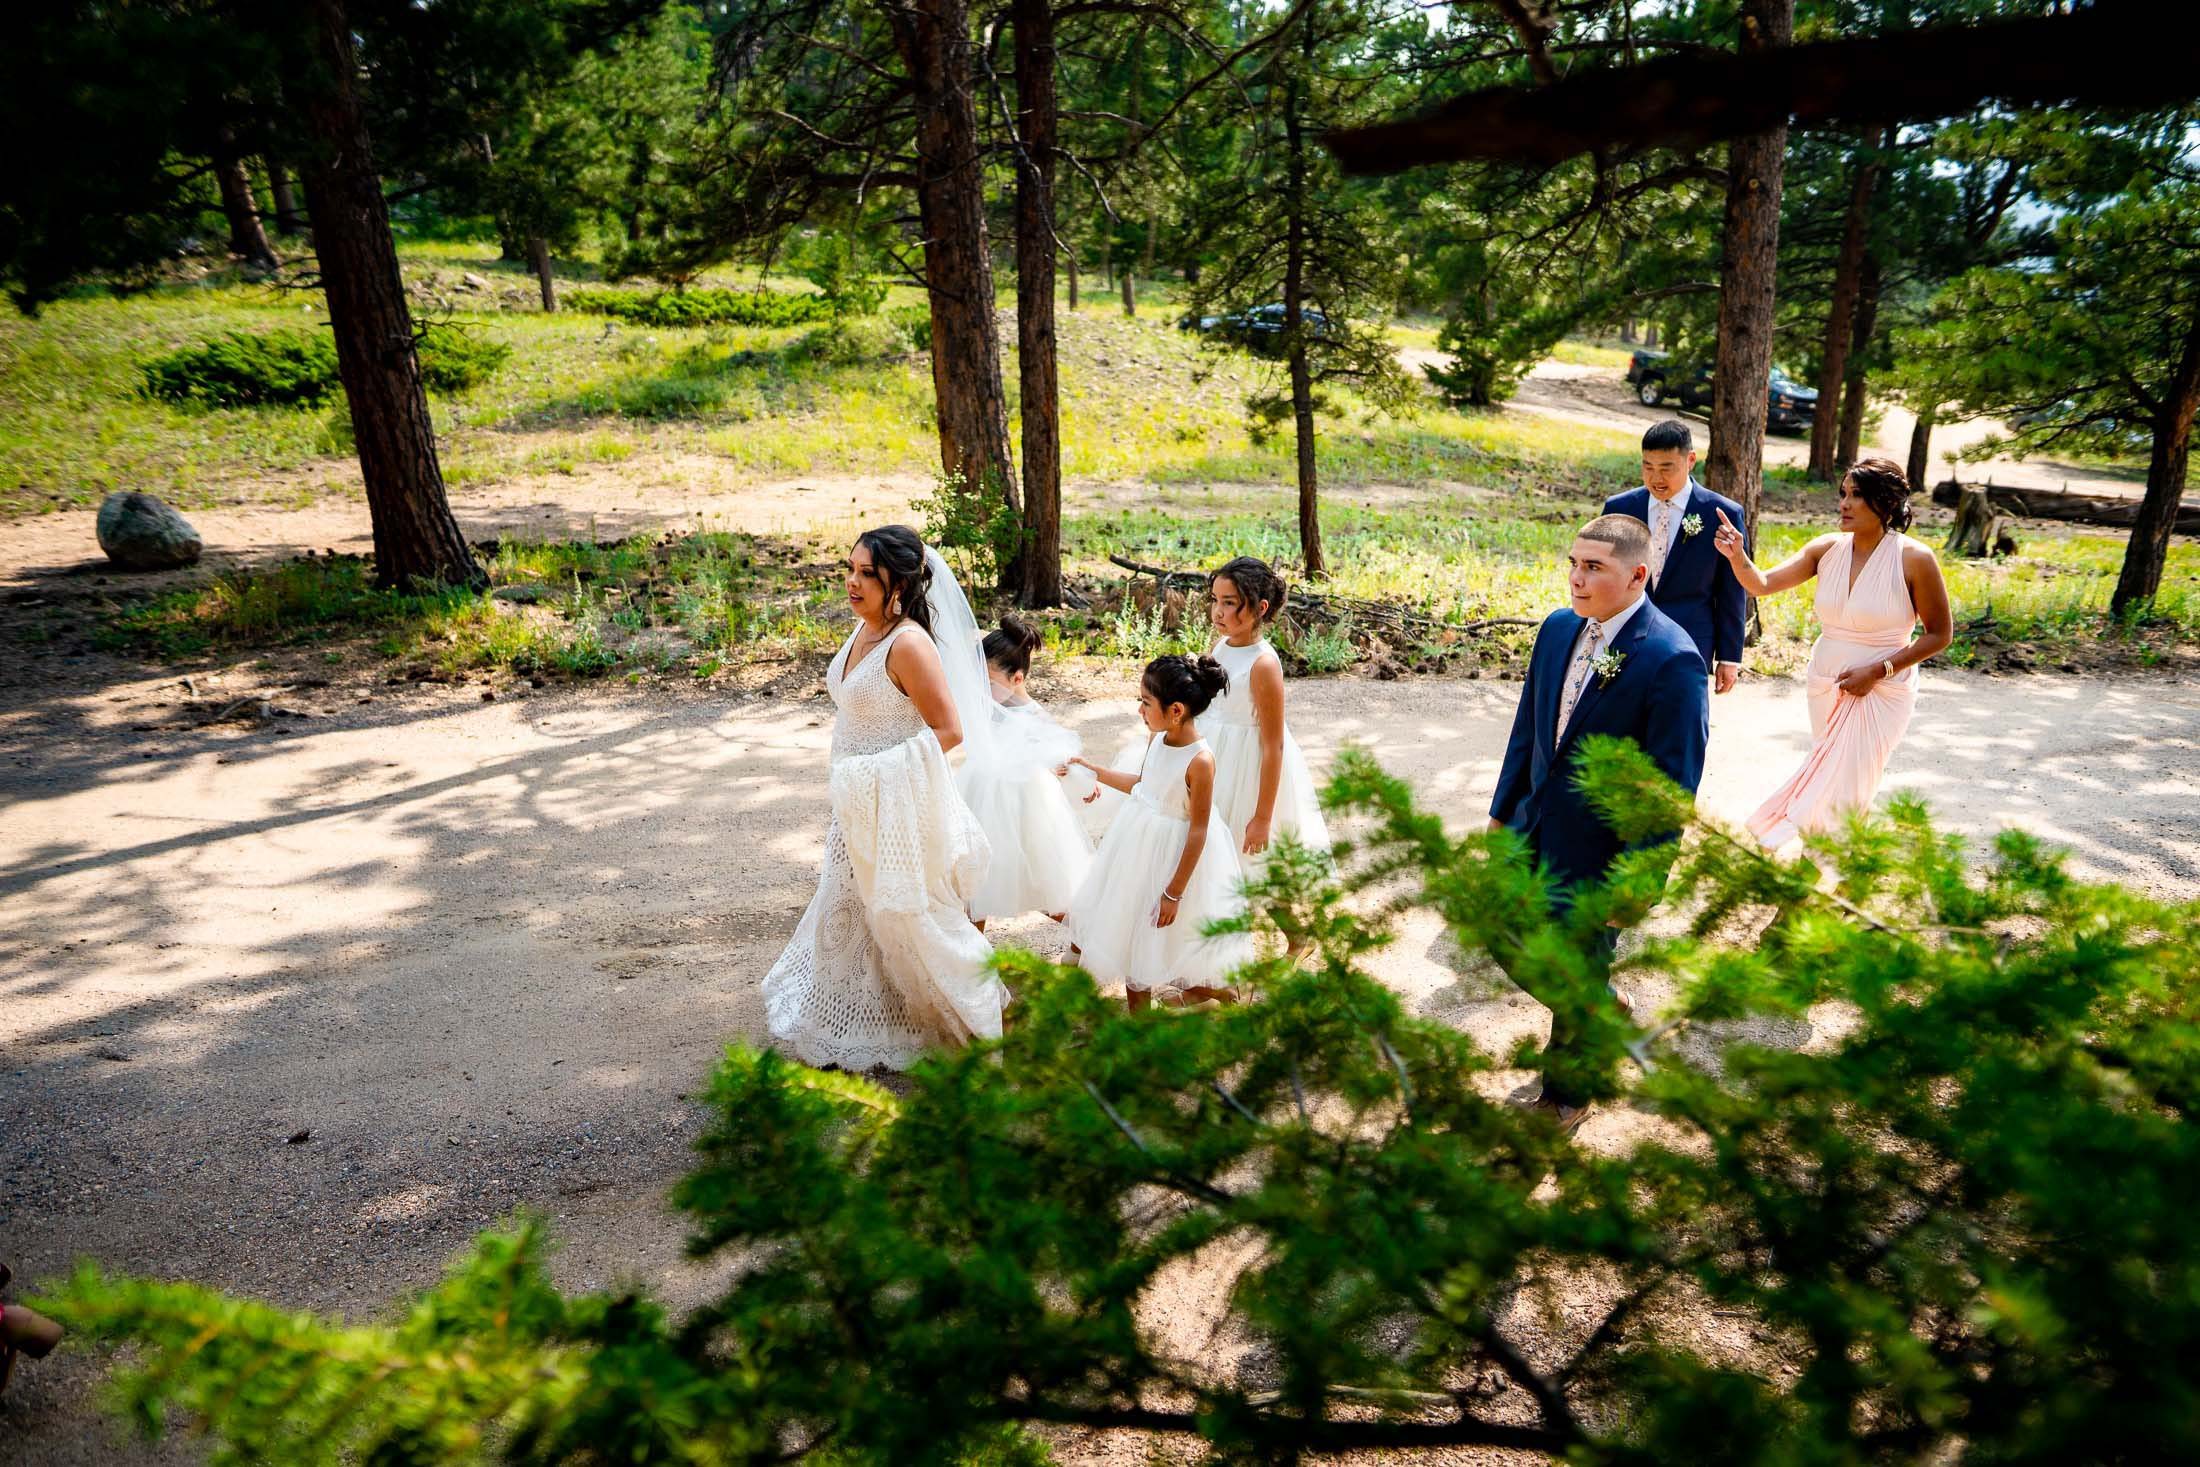 Bride walks with the wedding party in the forest after the wedding ceremony, wedding photos, wedding photography, wedding photographer, wedding inspiration, wedding photo inspiration, mountain wedding, YMCA of the Rockies wedding, YMCA of the Rockies wedding photos, YMCA of the Rockies wedding photography, YMCA of the Rockies wedding photographer, YMCA of the Rockies wedding inspiration, YMCA of the Rockies wedding venue, Estes Park wedding, Estes Park wedding photos, Estes Park wedding photography, Estes Park wedding photographer, Colorado wedding, Colorado wedding photos, Colorado wedding photography, Colorado wedding photographer, Colorado mountain wedding, Colorado wedding inspiration